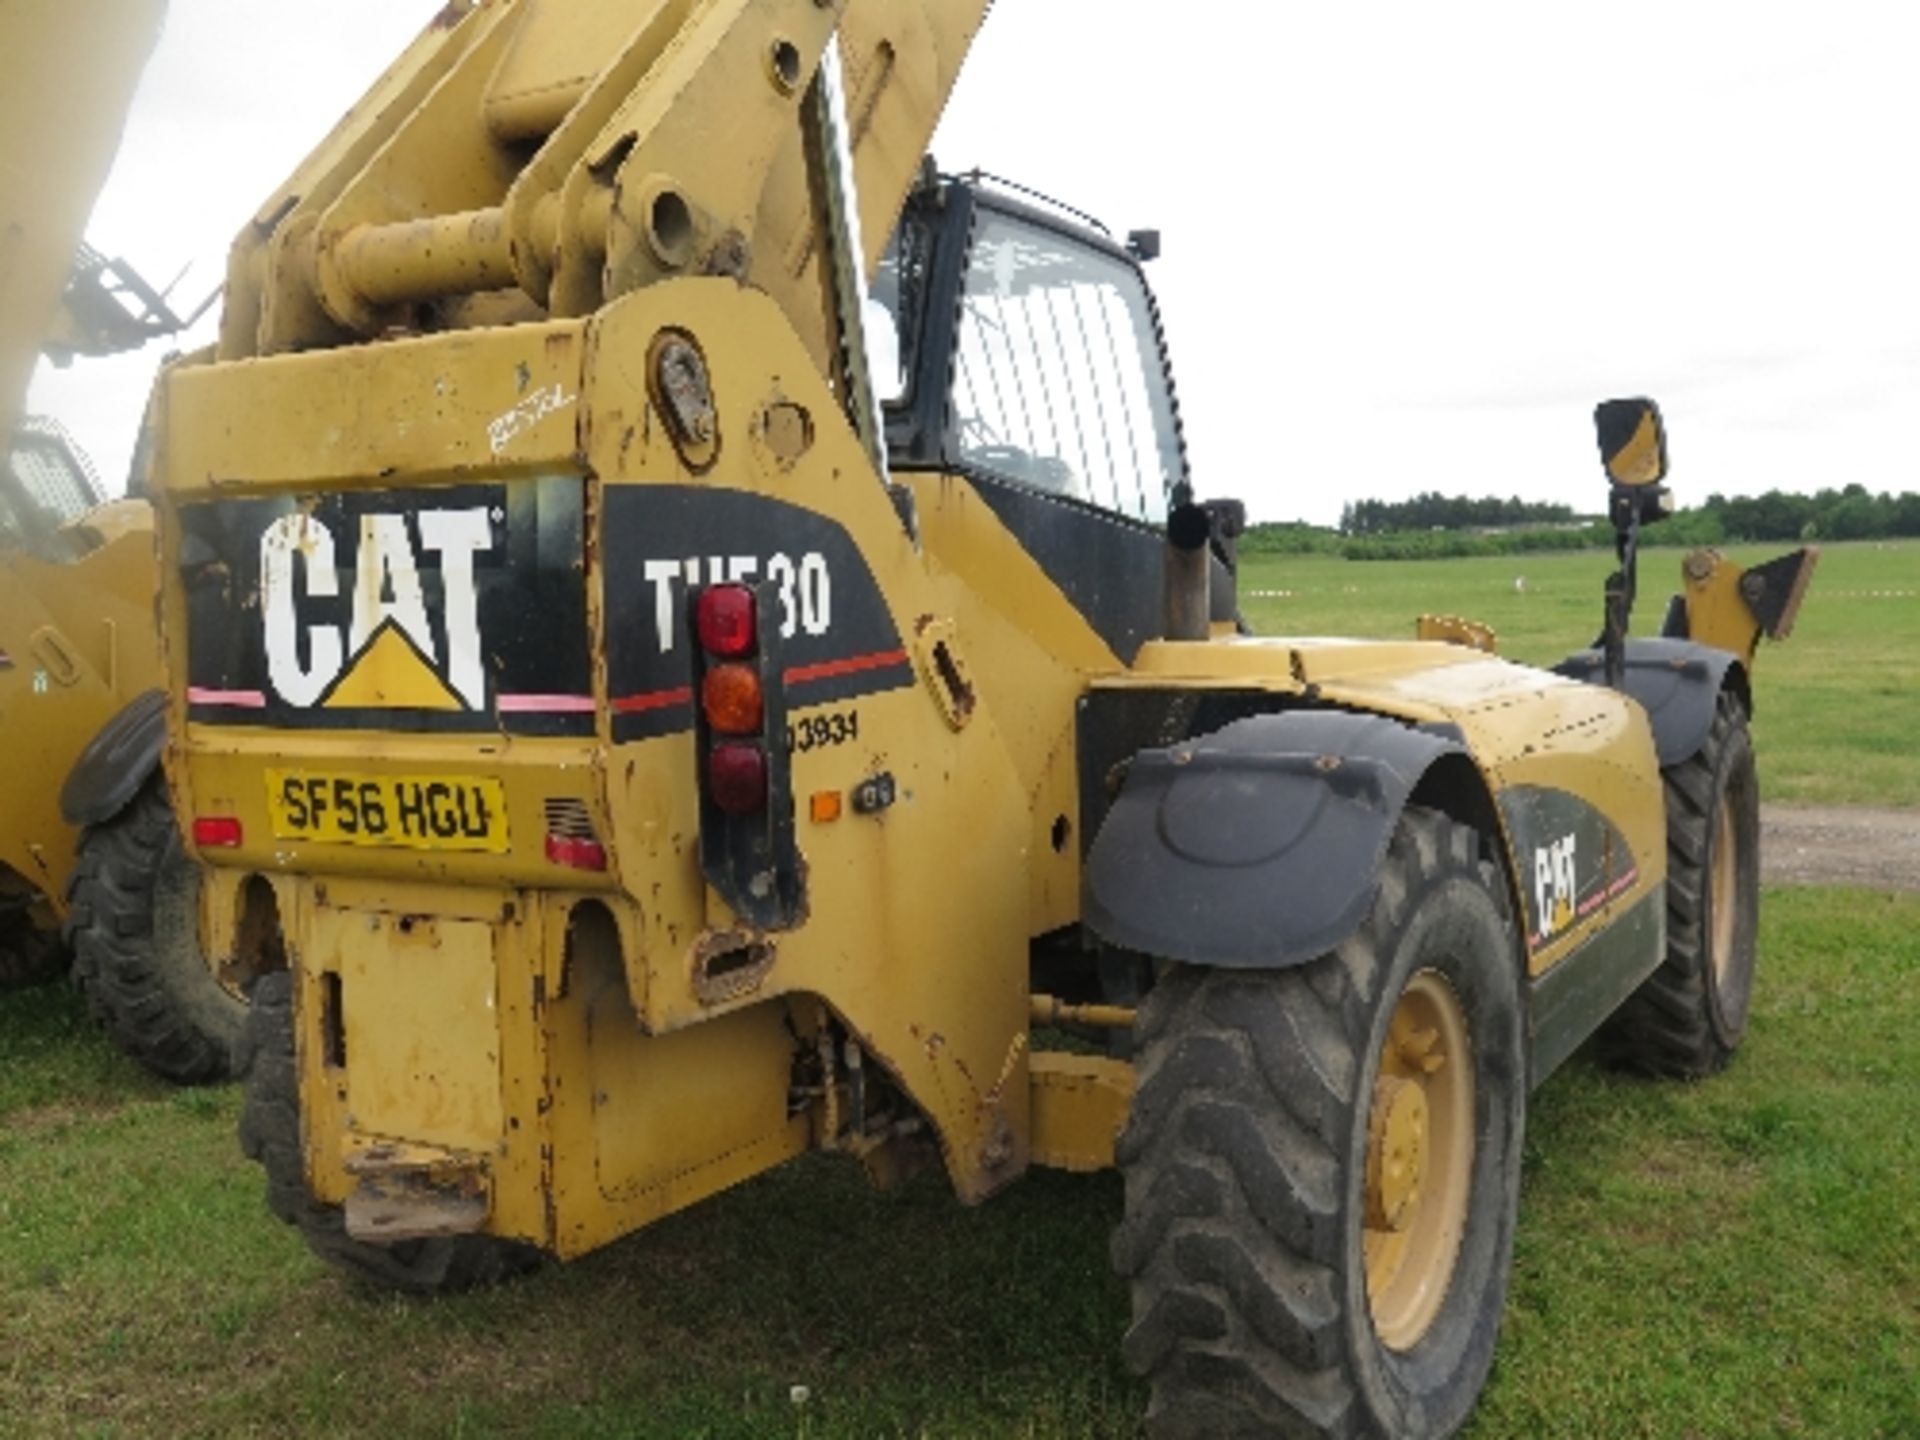 Caterpillar TH580B telehandler 4608 hrs  143934
BELIEVED 2006
NO TELE IN/OUT FUNCTION
ALL LOTS - Image 5 of 7